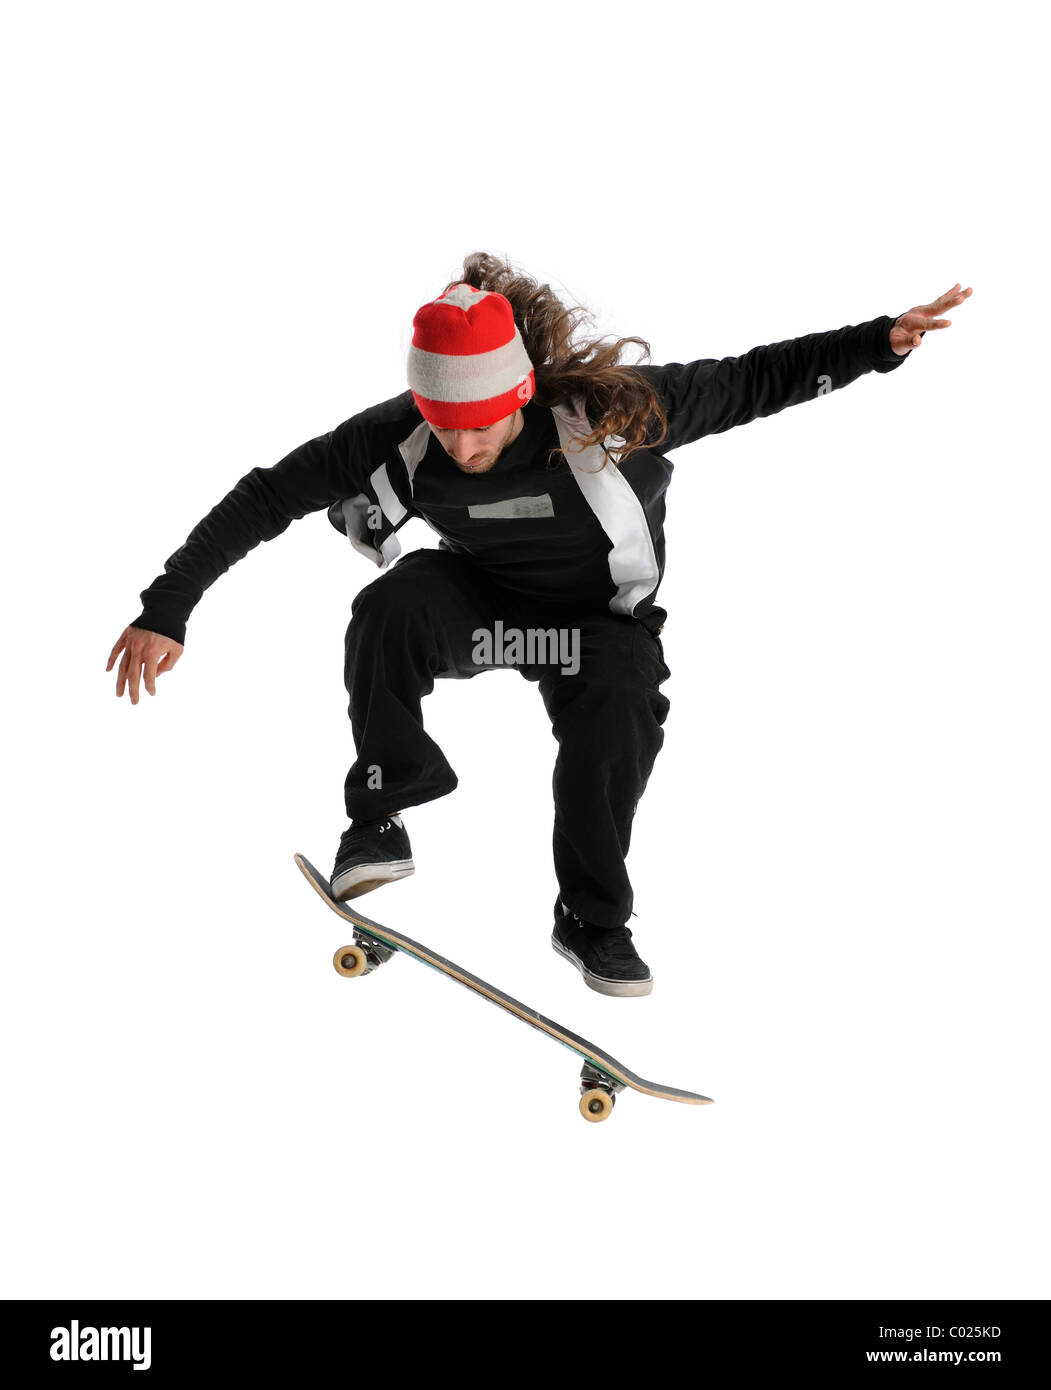 Young skateboarder jumping performing a trick isolated over white background Stock Photo